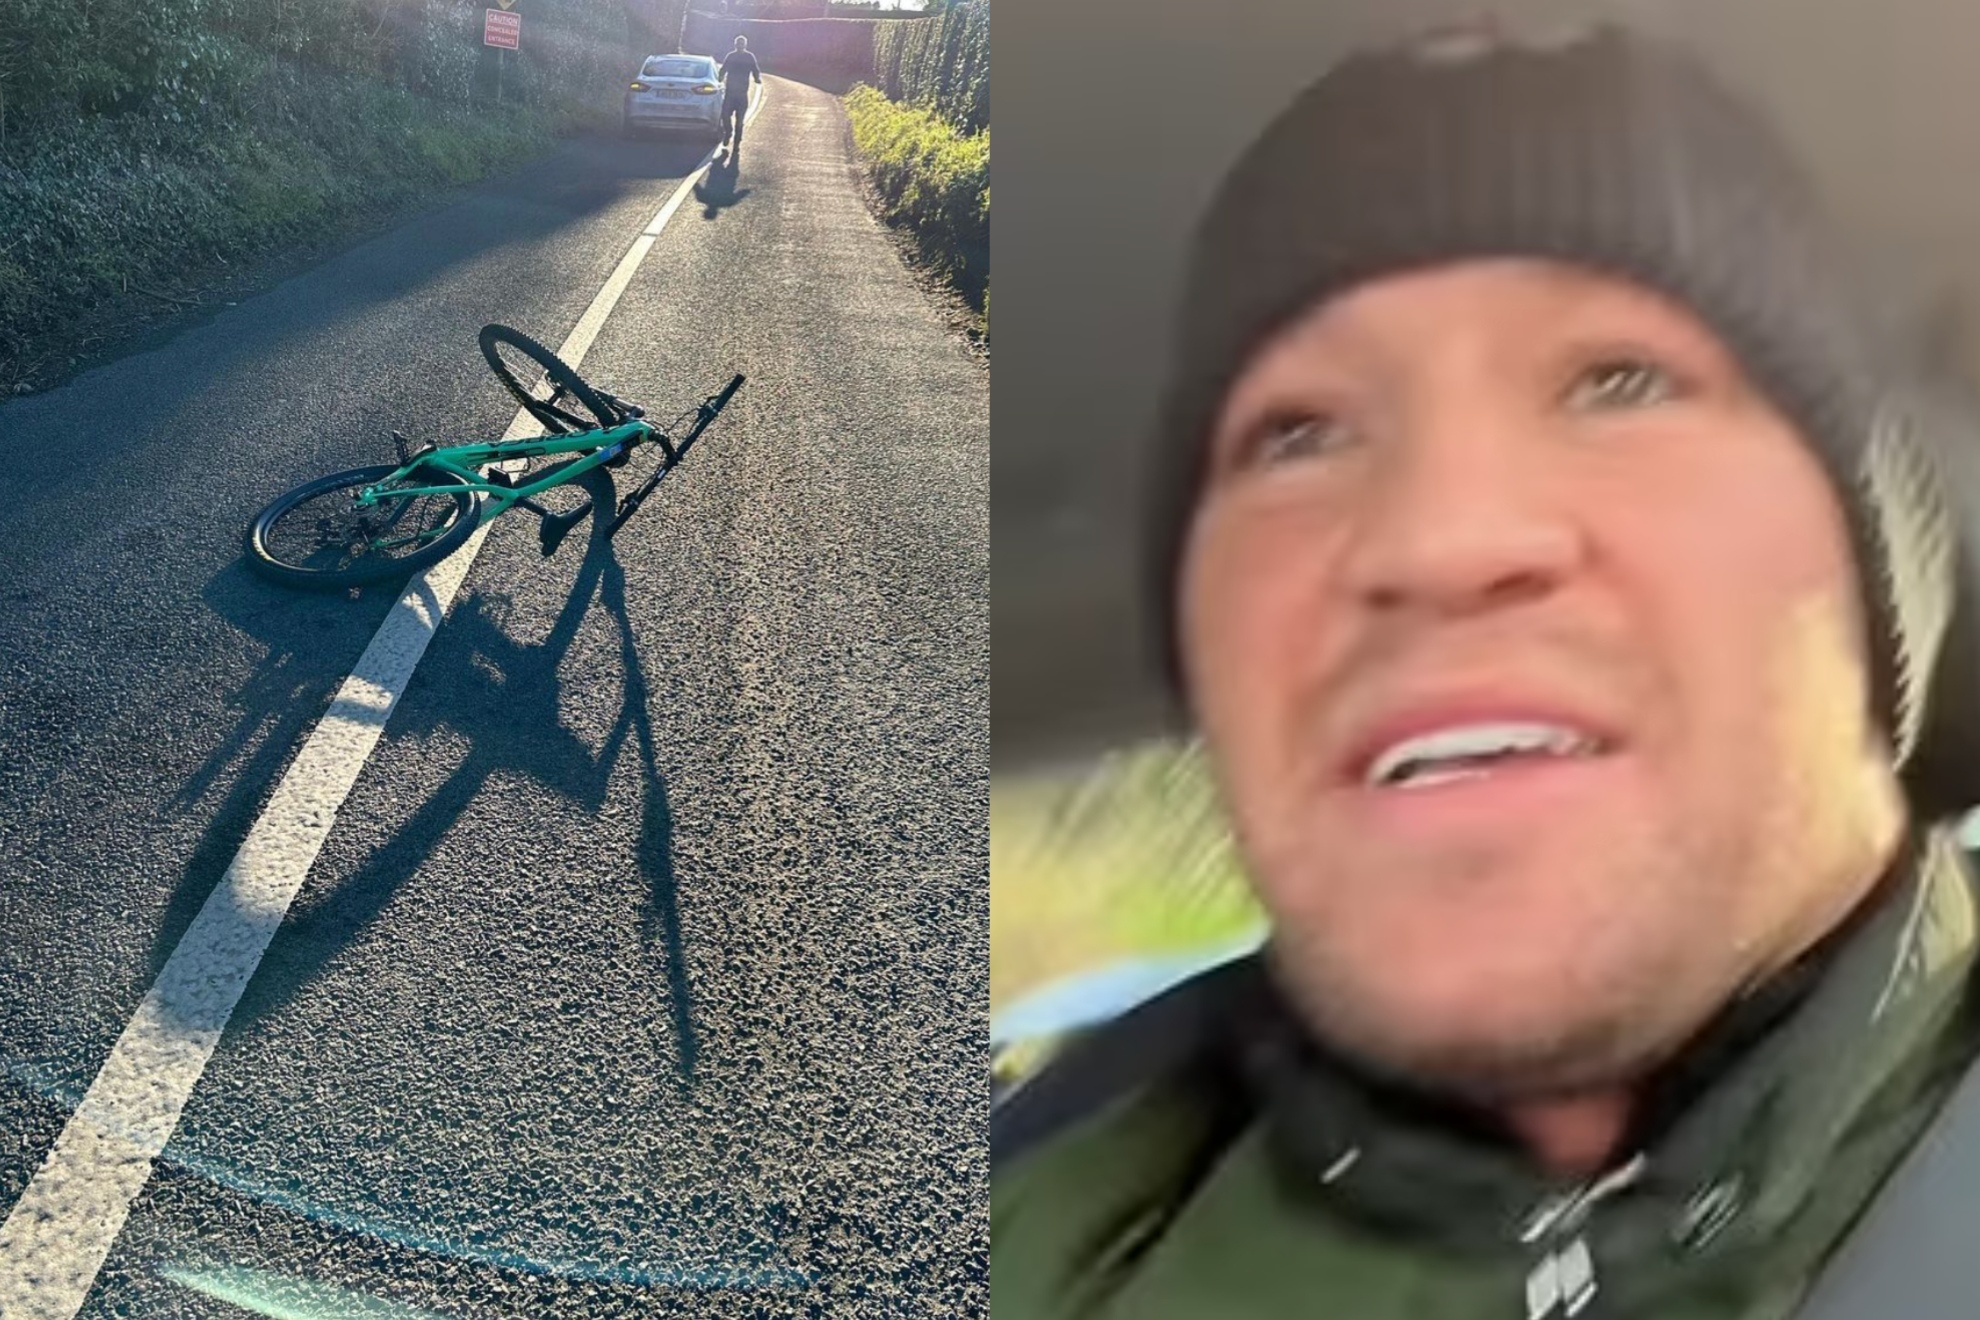 onor McGregor suffers a bike accident.